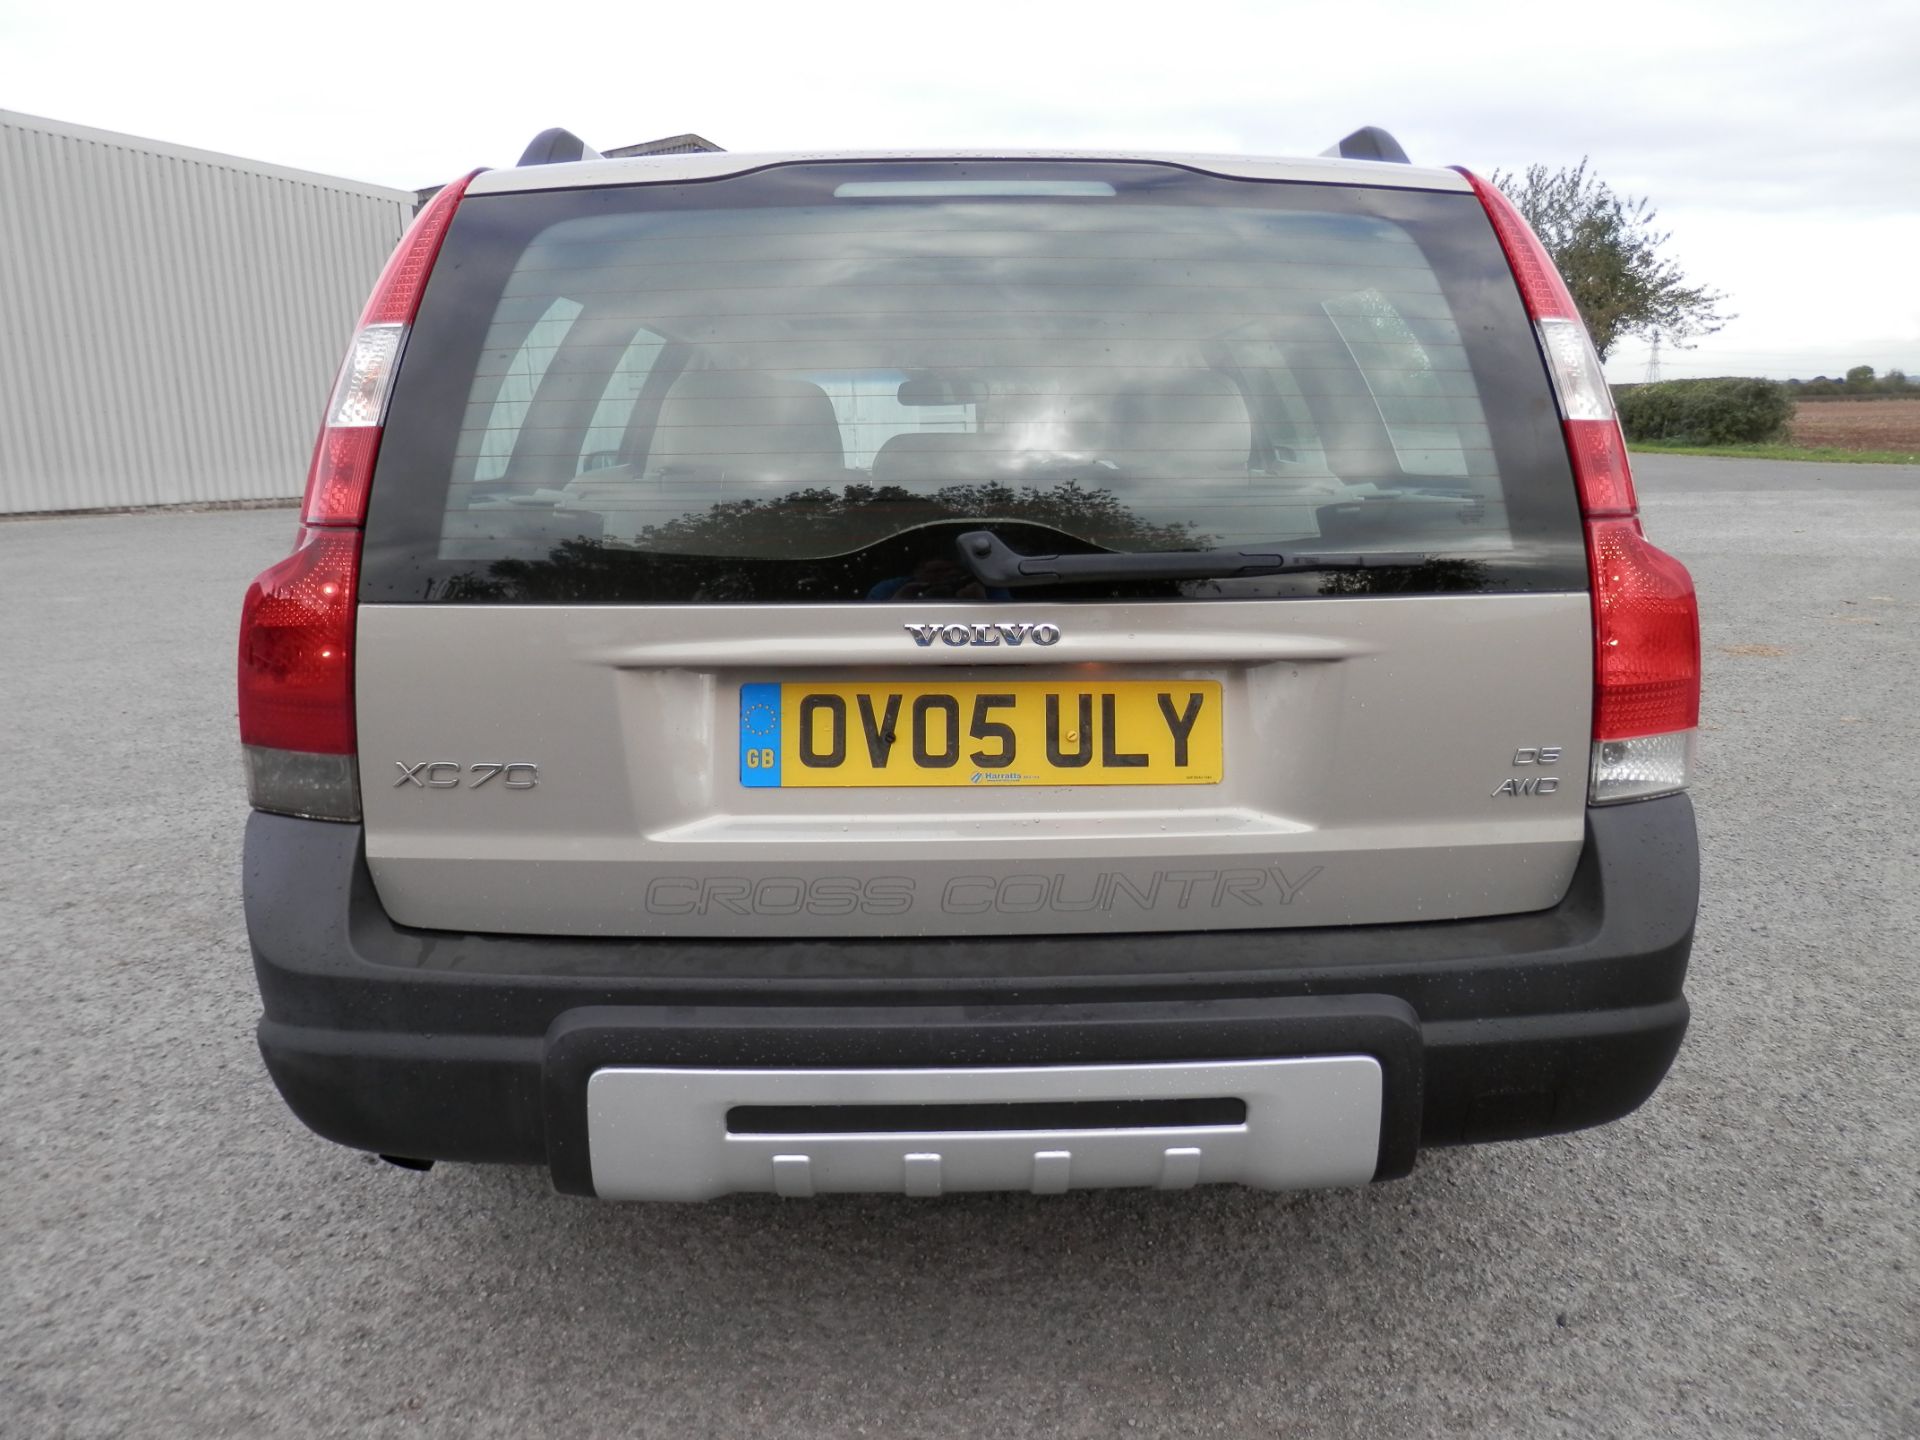 2005/05 VOLVO XC70 CROSS COUNTRY 2.4 D5 DIESEL AUTOMATIC, 4 WHEEL DRIVE, MOT MAY 2017, 150K MILES. - Image 3 of 26